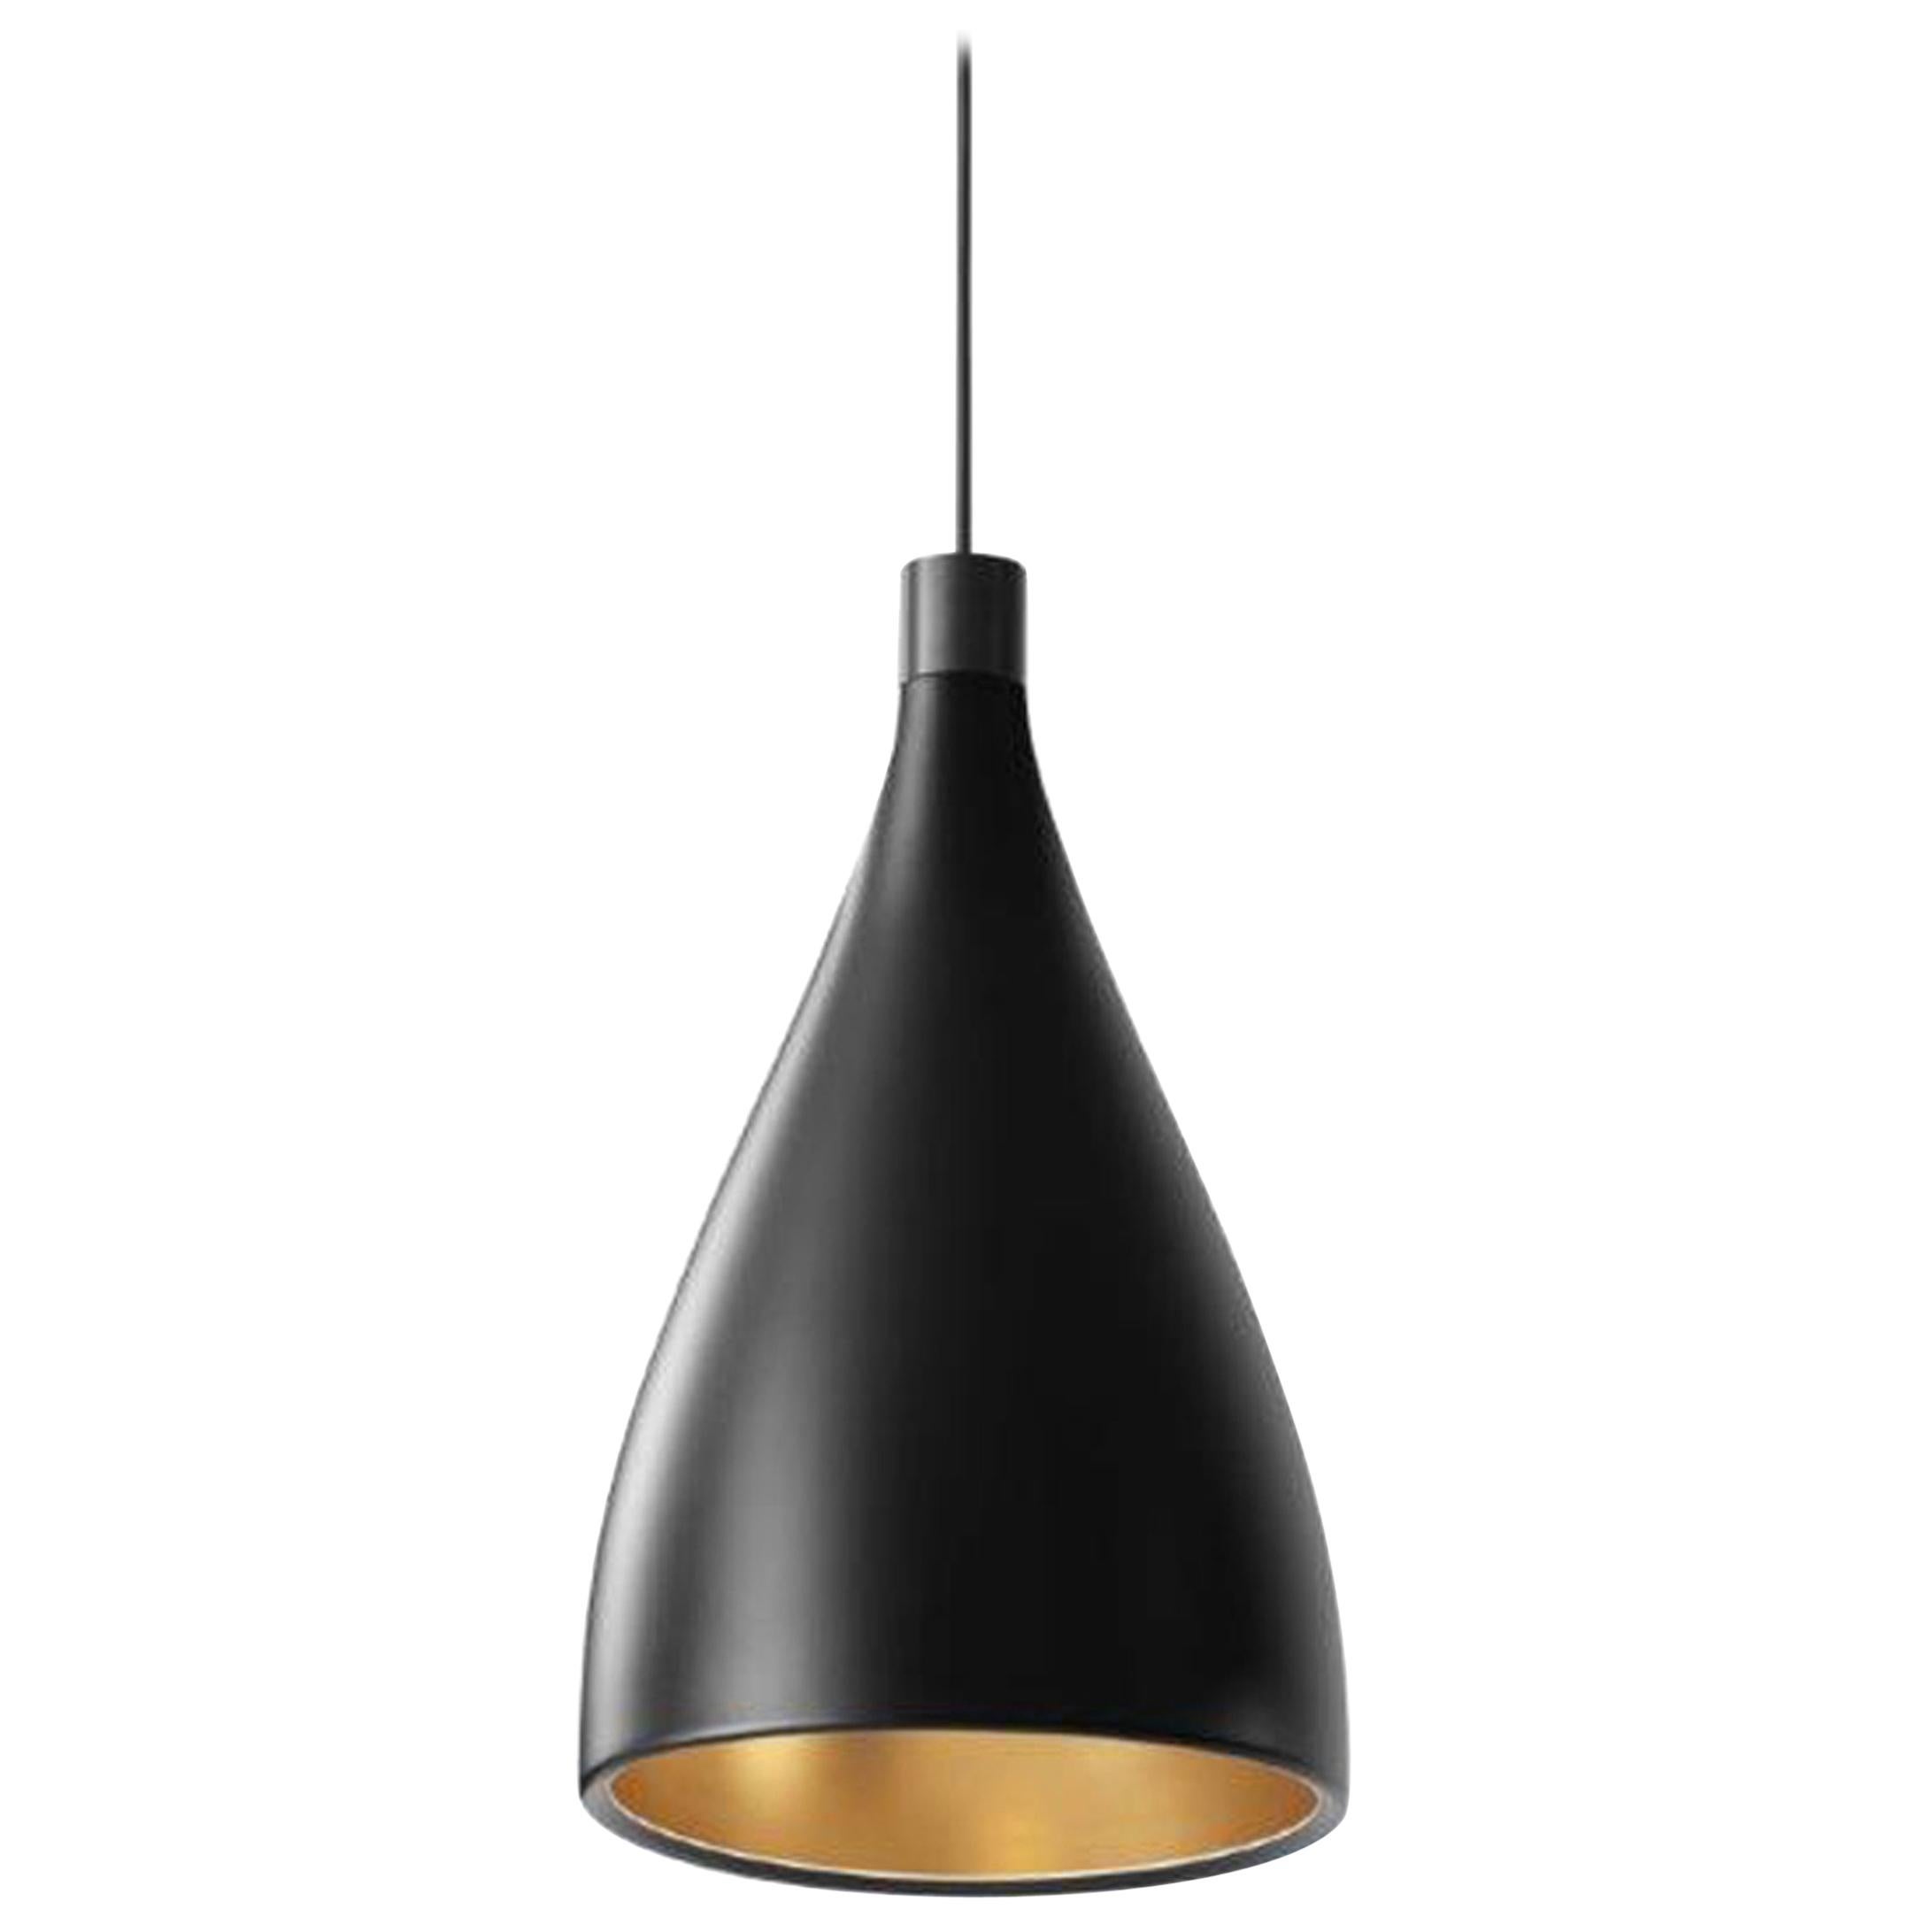 Swell XL Single Narrow LED Pendant Lamp in Black and Brass by Pablo Designs